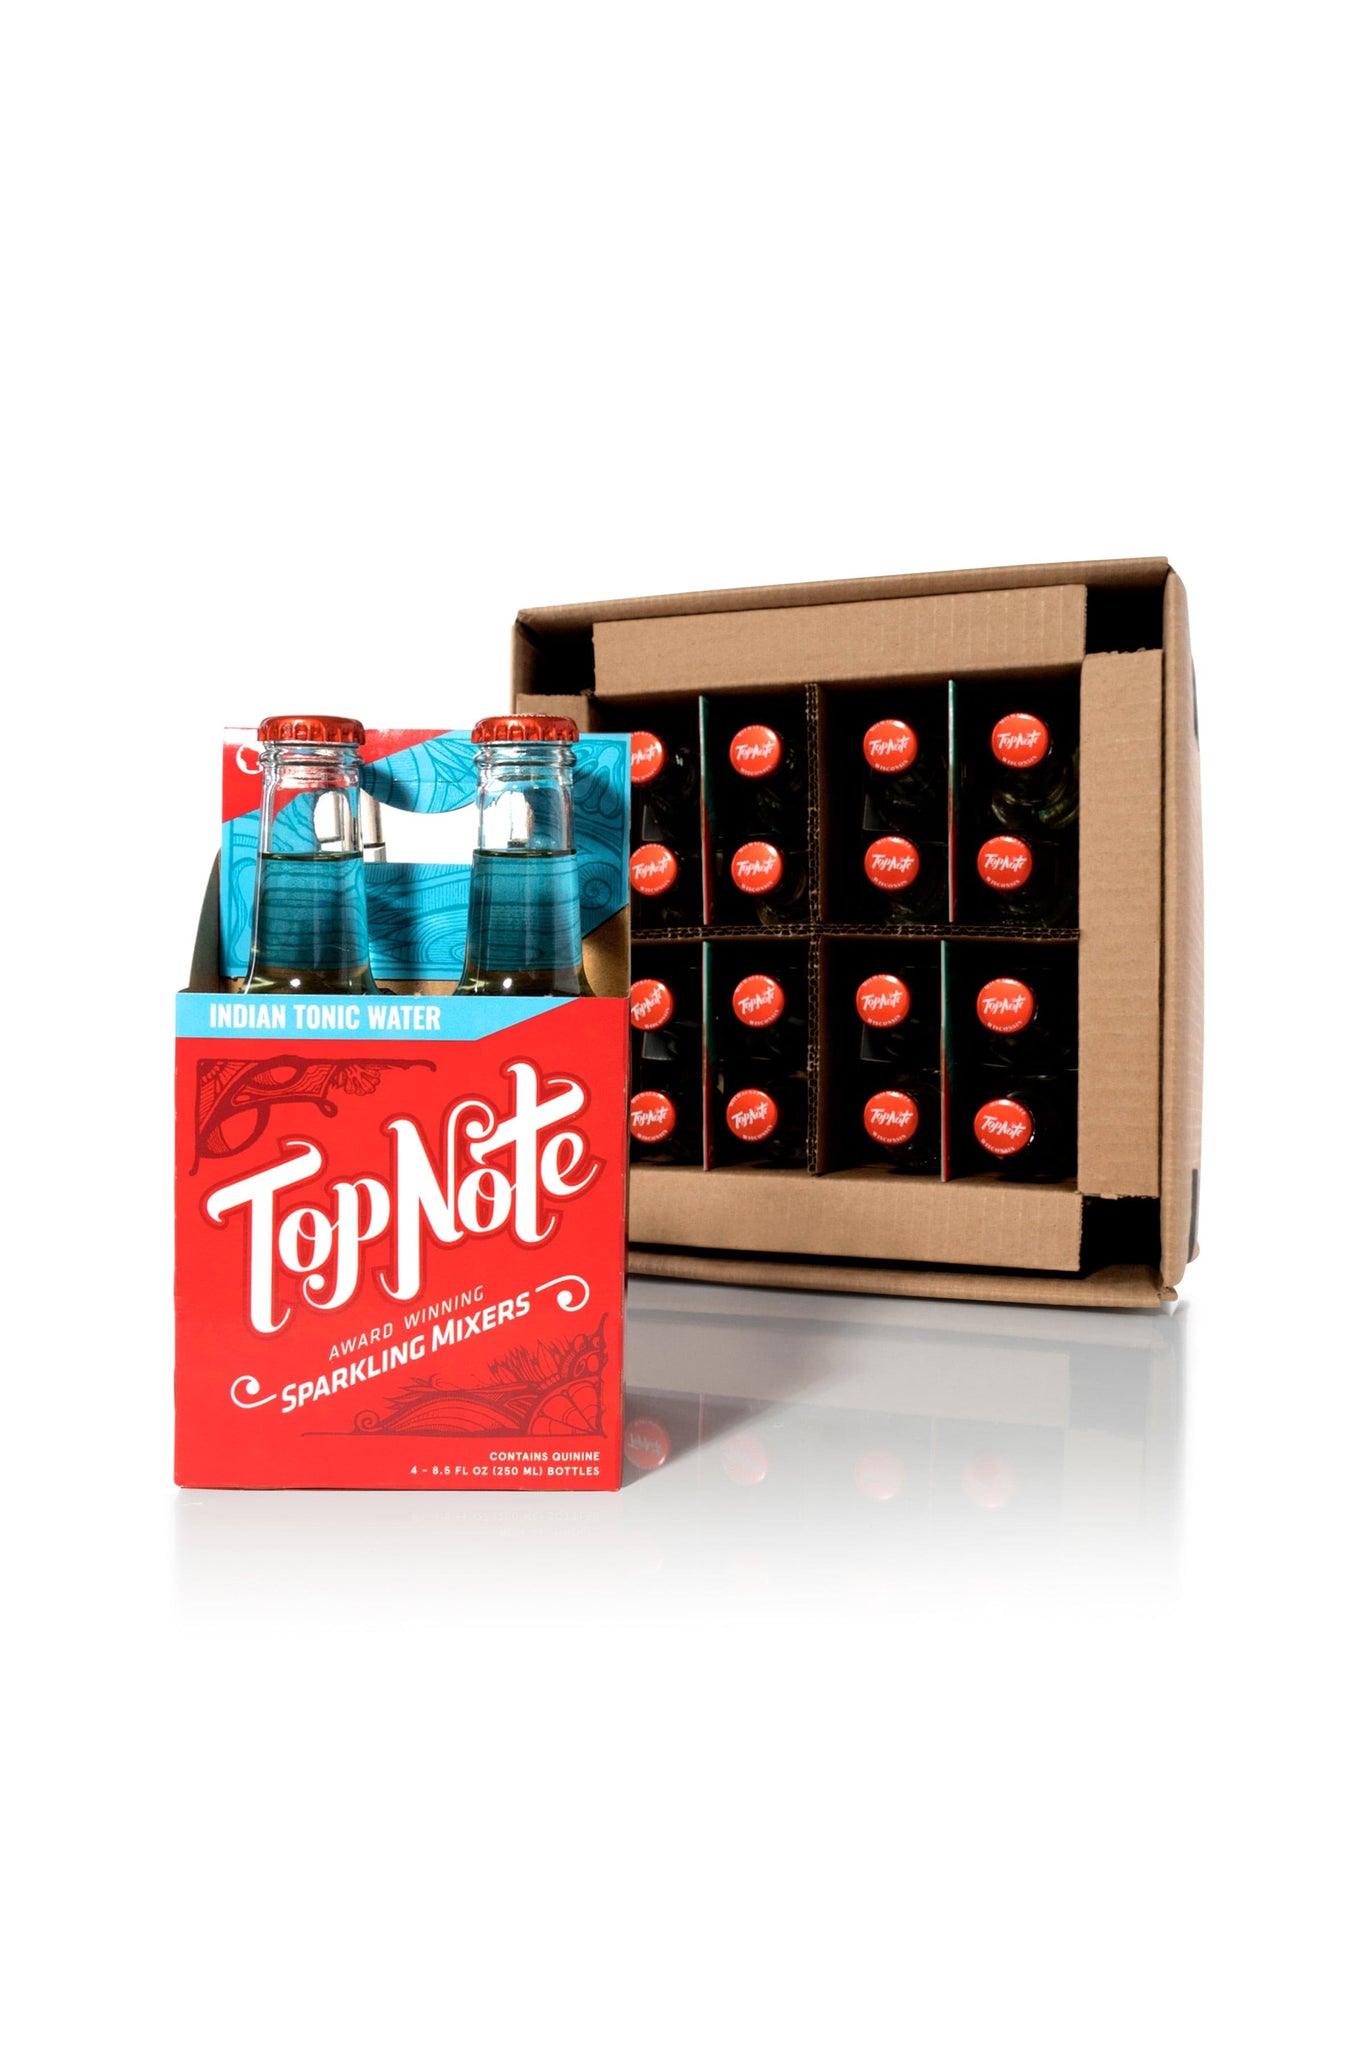 16 Pack Indian Tonic Water, sofi Award winner! by Top Note Tonic Store